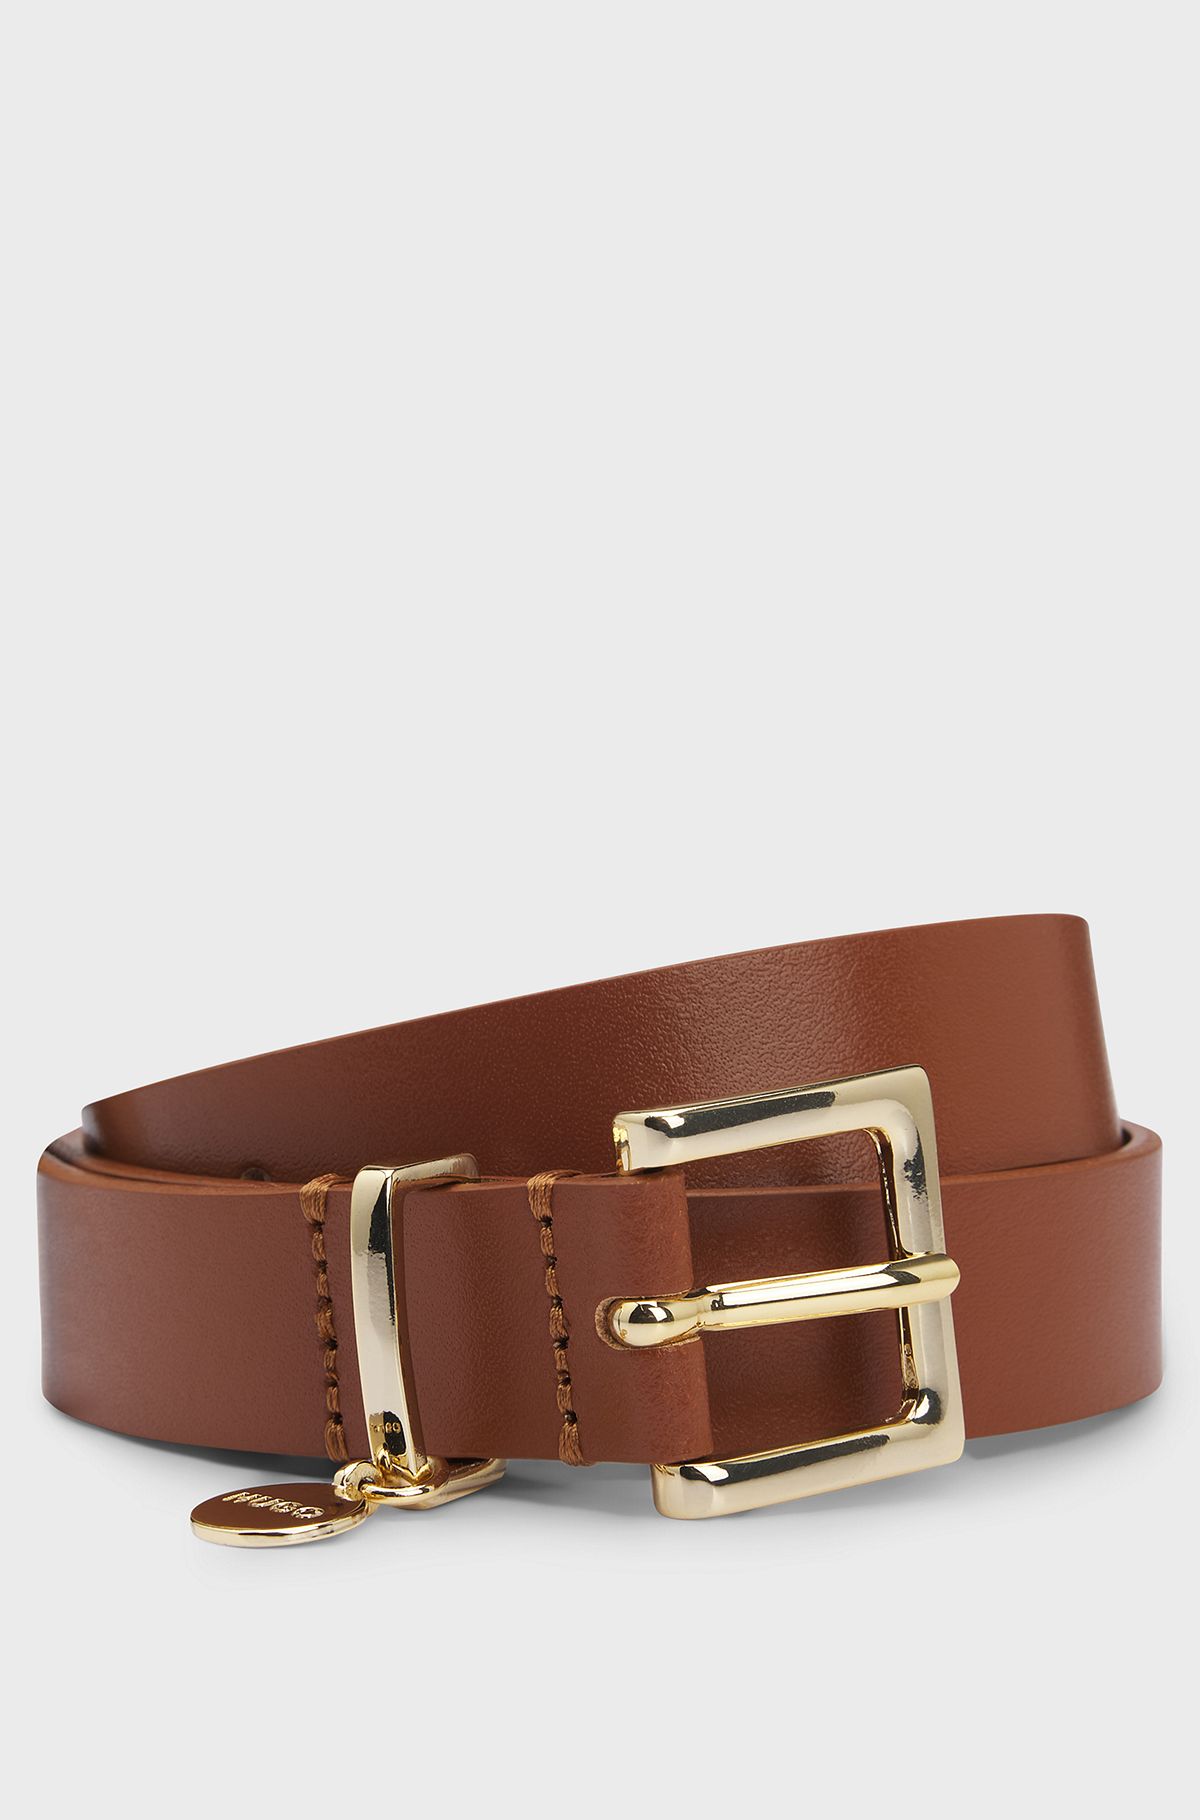 Italian-leather belt with gold-tone logo charm, Brown